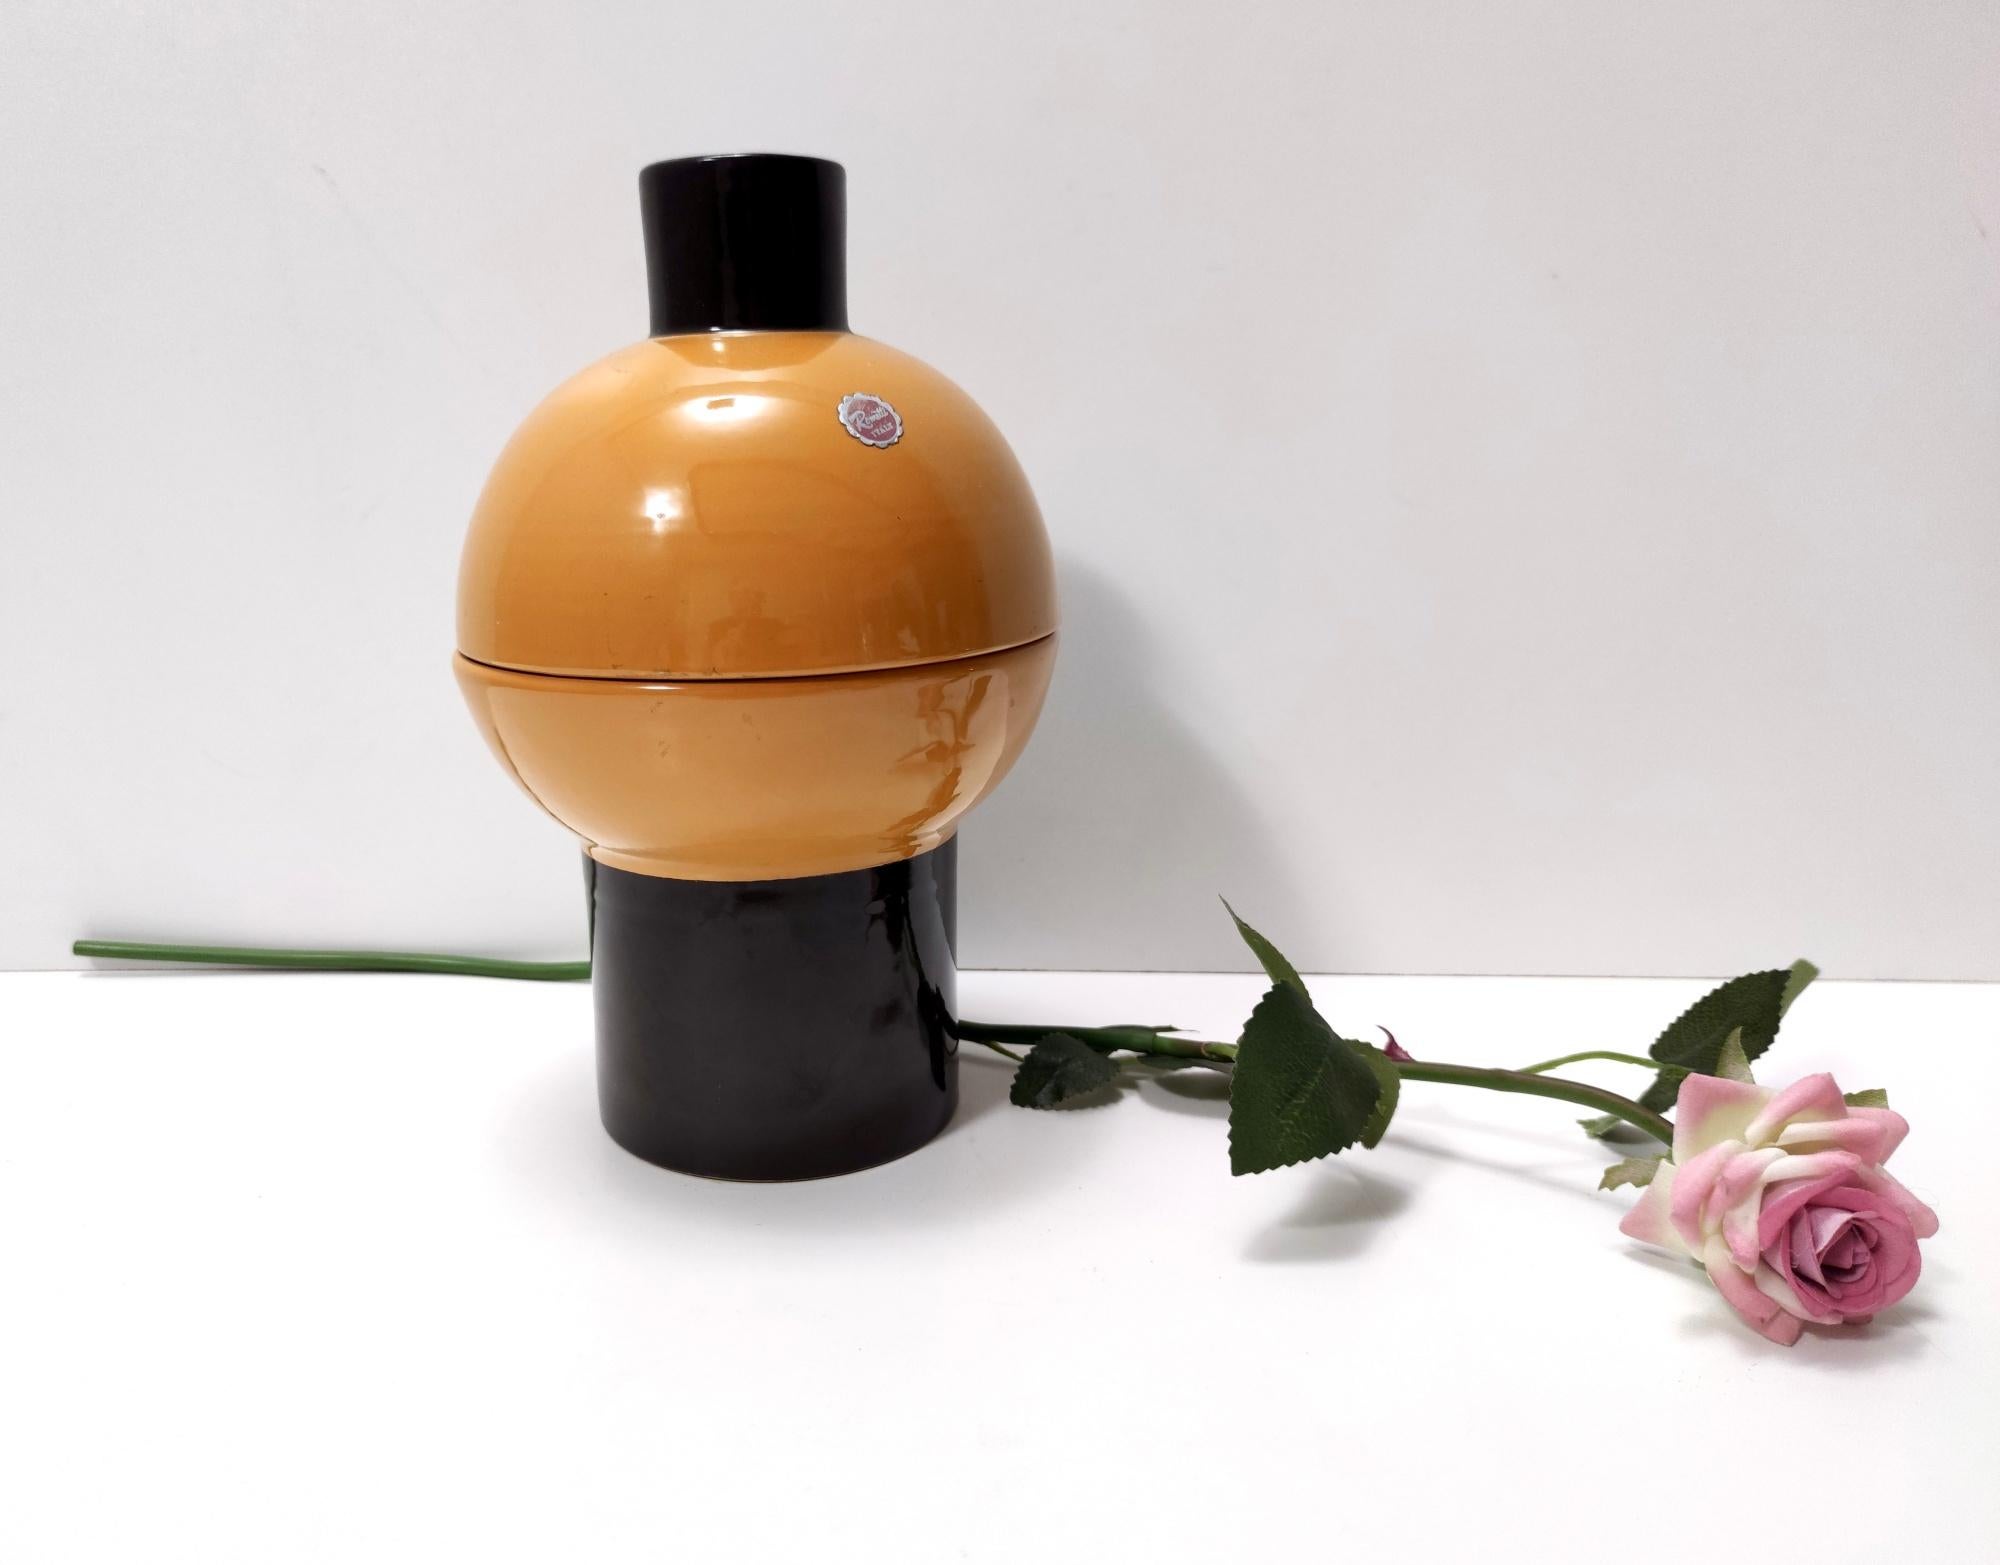 Made in Italy, 1960s-1970s.
This cookie jar is labelled and signed by Rometti Italy.
This item features a central spheric part that is divided on its median, which separates the base and the lid. This part has a cylindrical pommel and lays on a